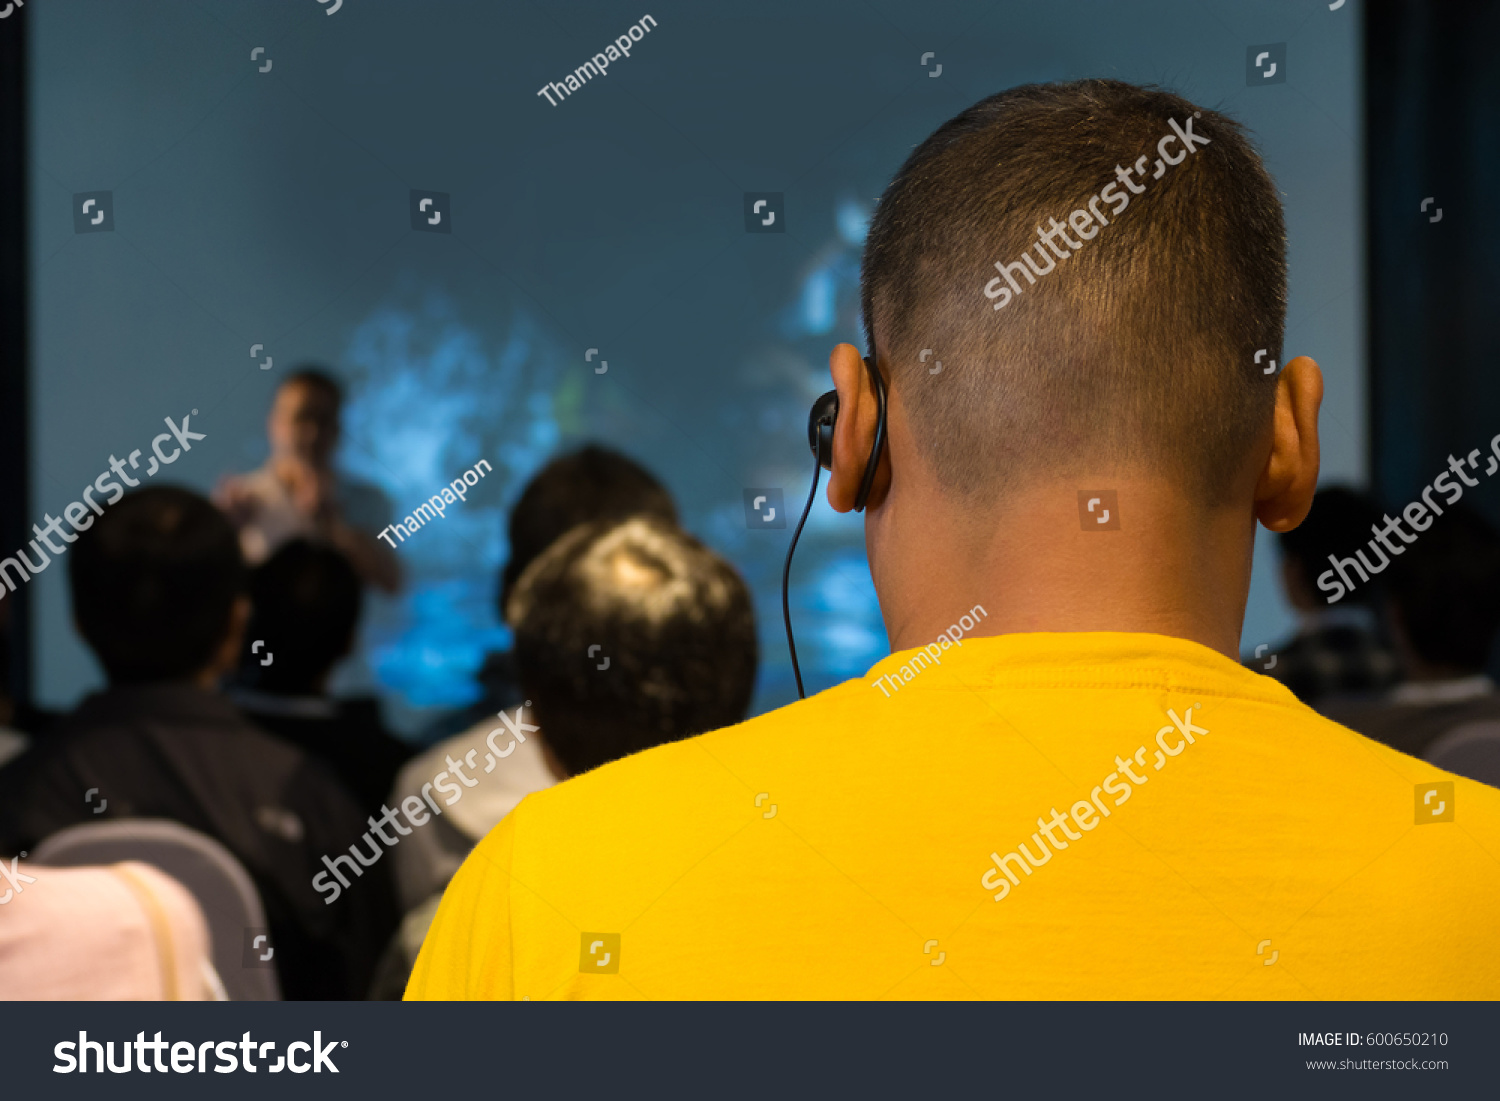 The Male Audience at International Business Meeting or Seminar wearing headphone for online interpreter or Translation as part of Interpretation System #600650210